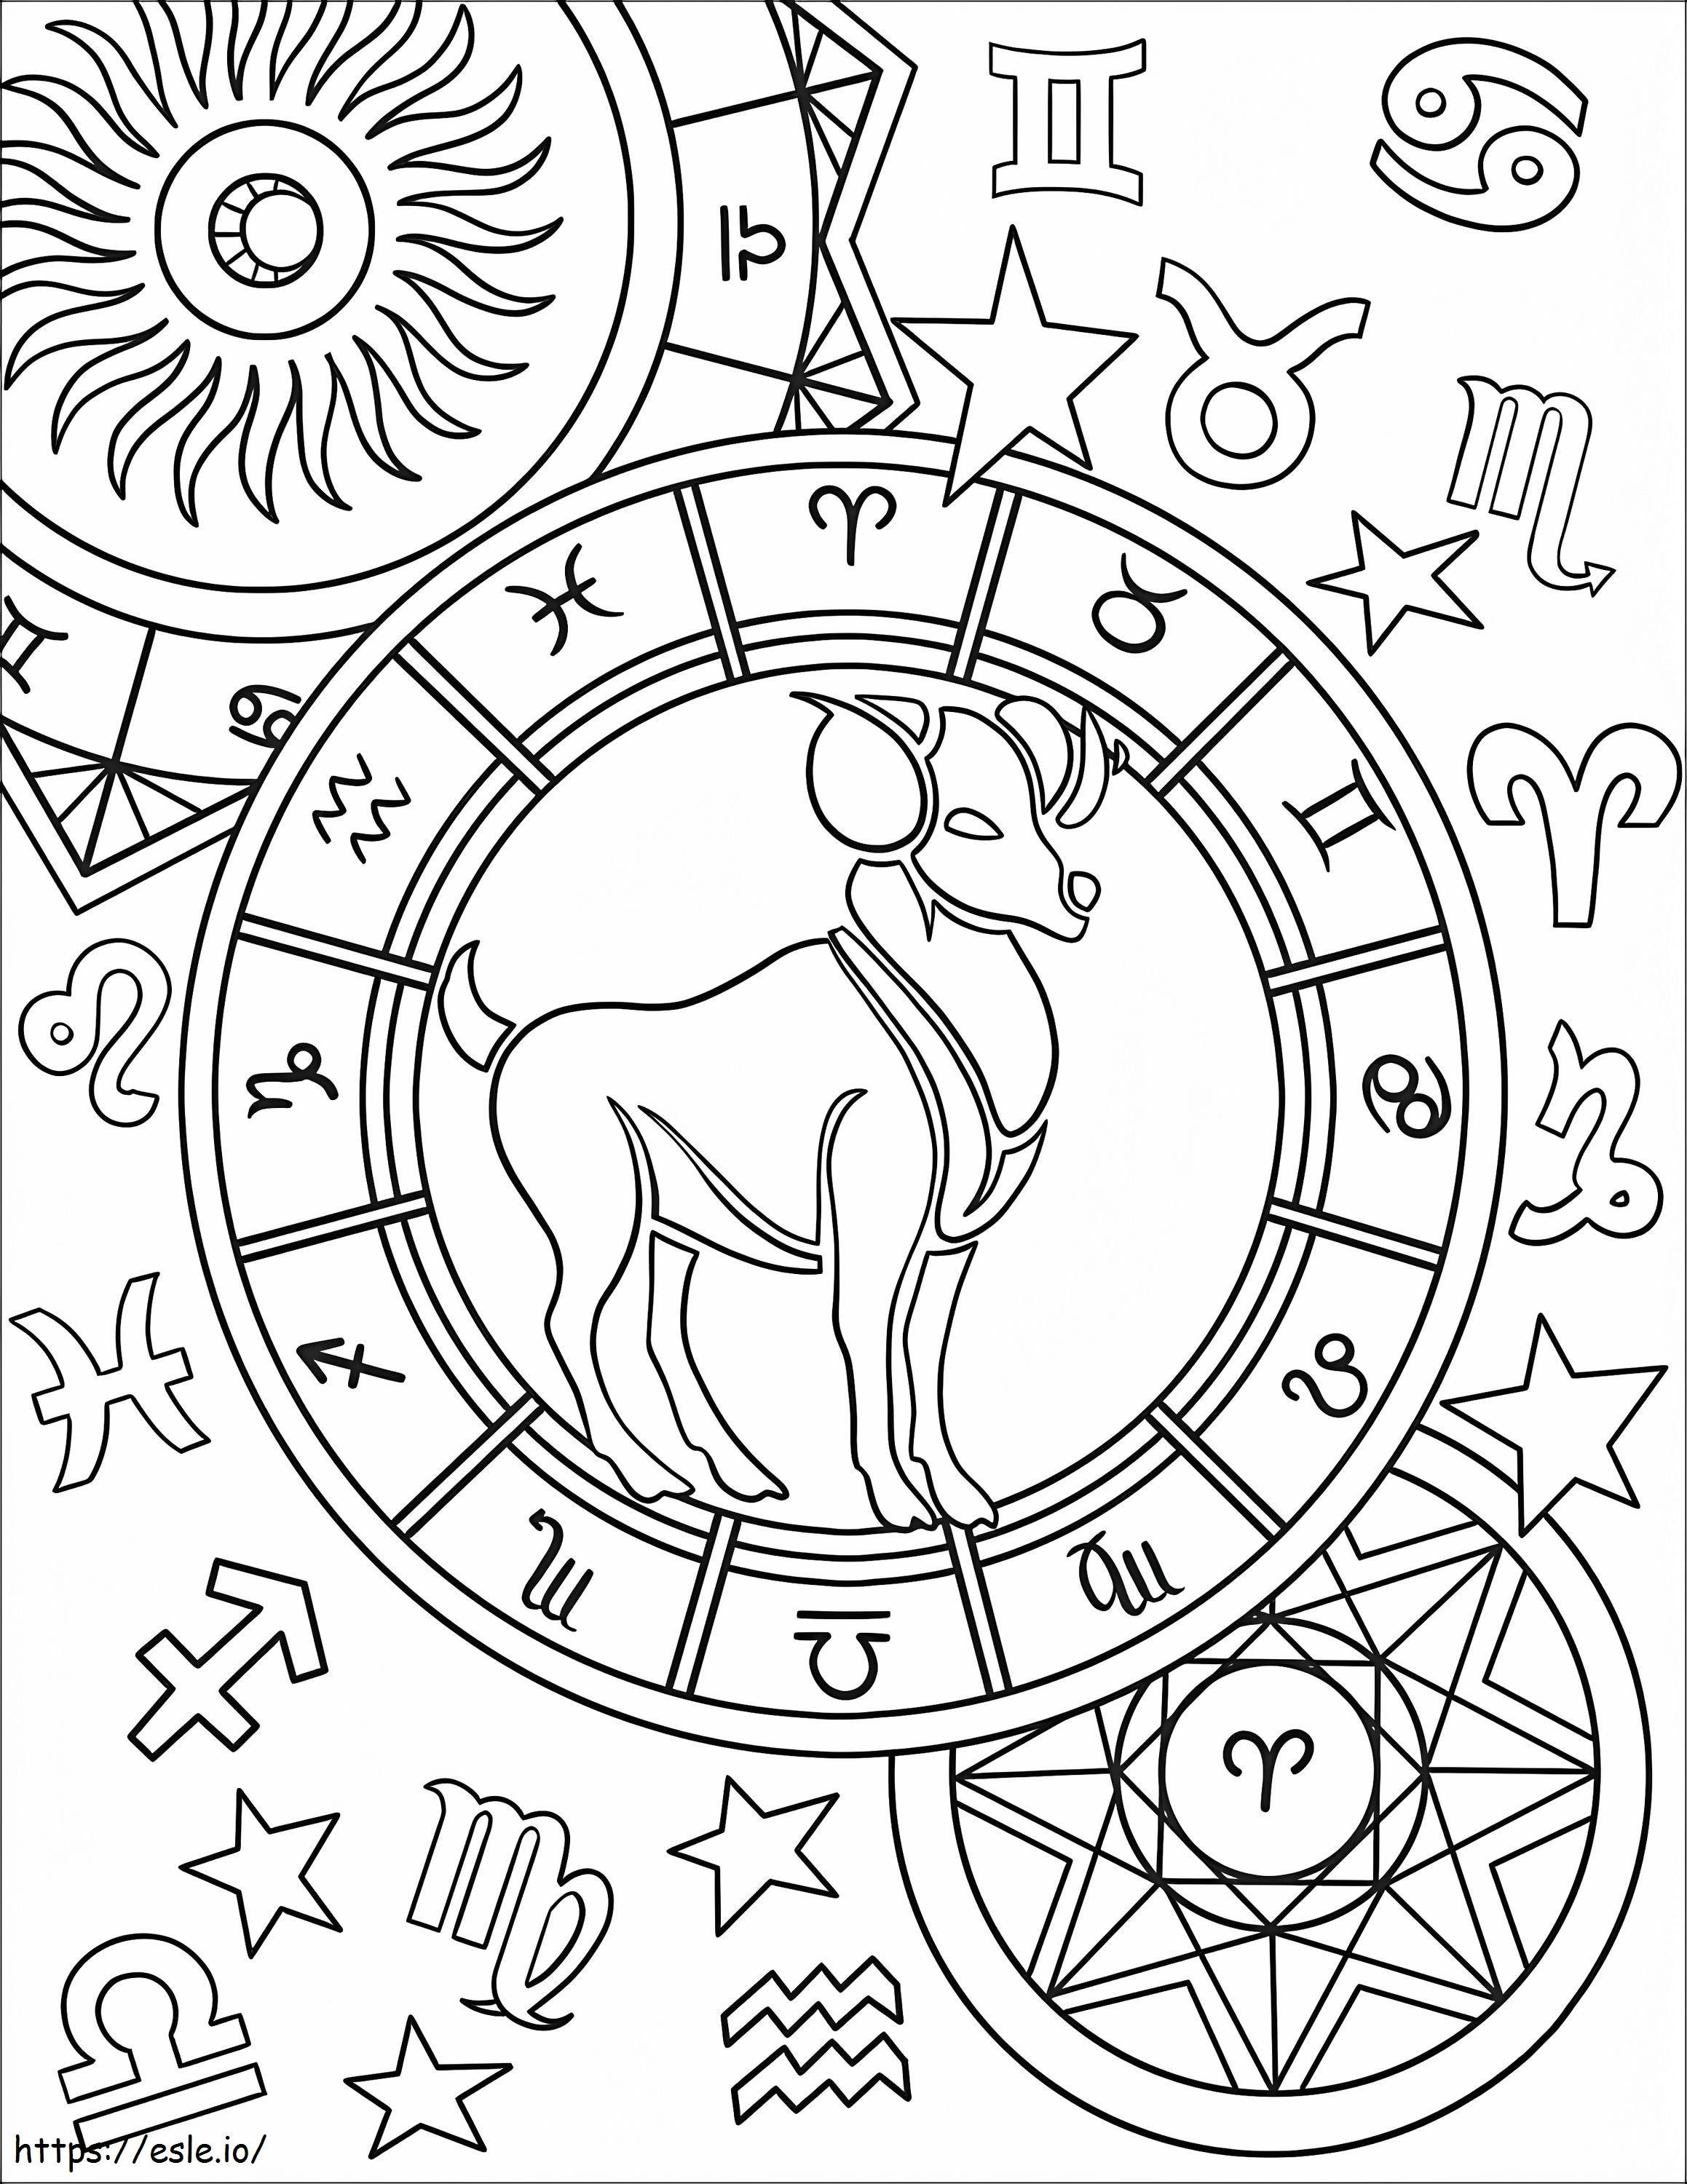 To 1597710204 Bds coloring page